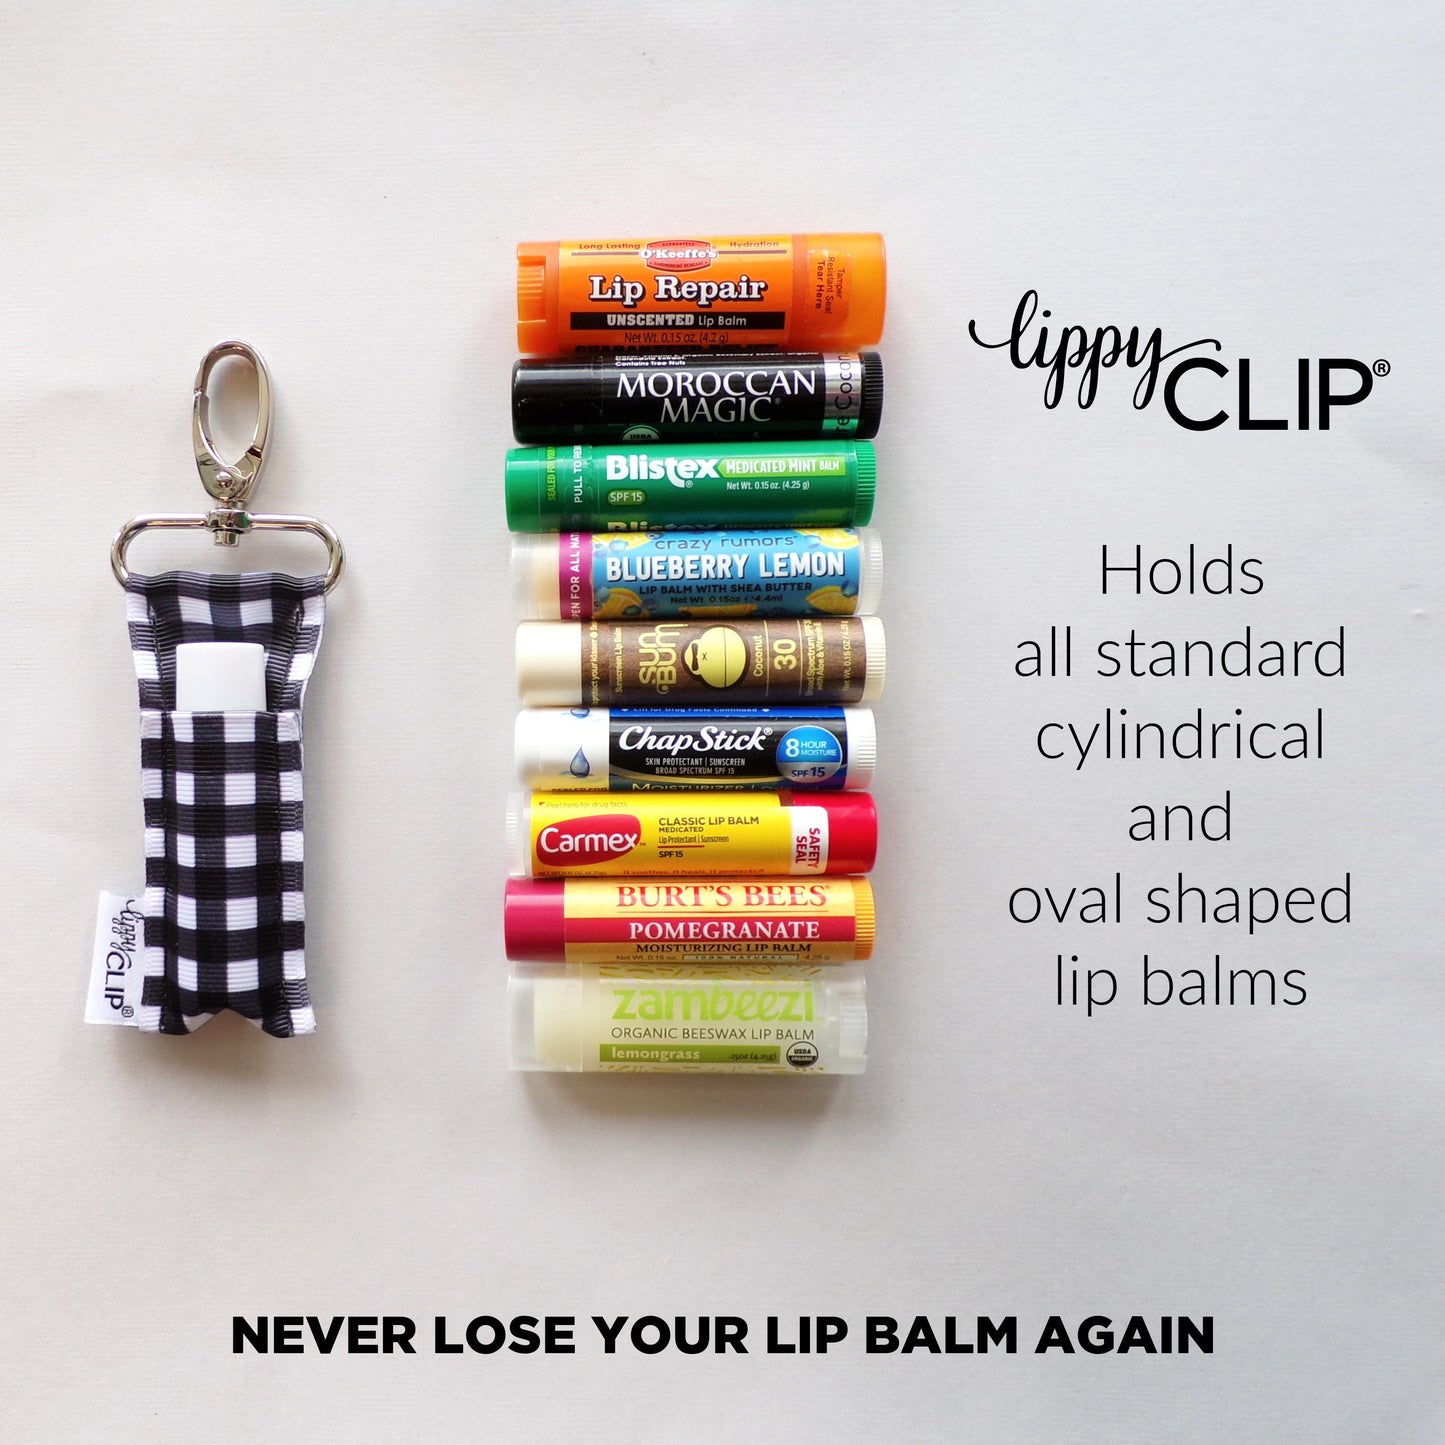 Stained Glass Cross LippyClip® Lip Balm Holder